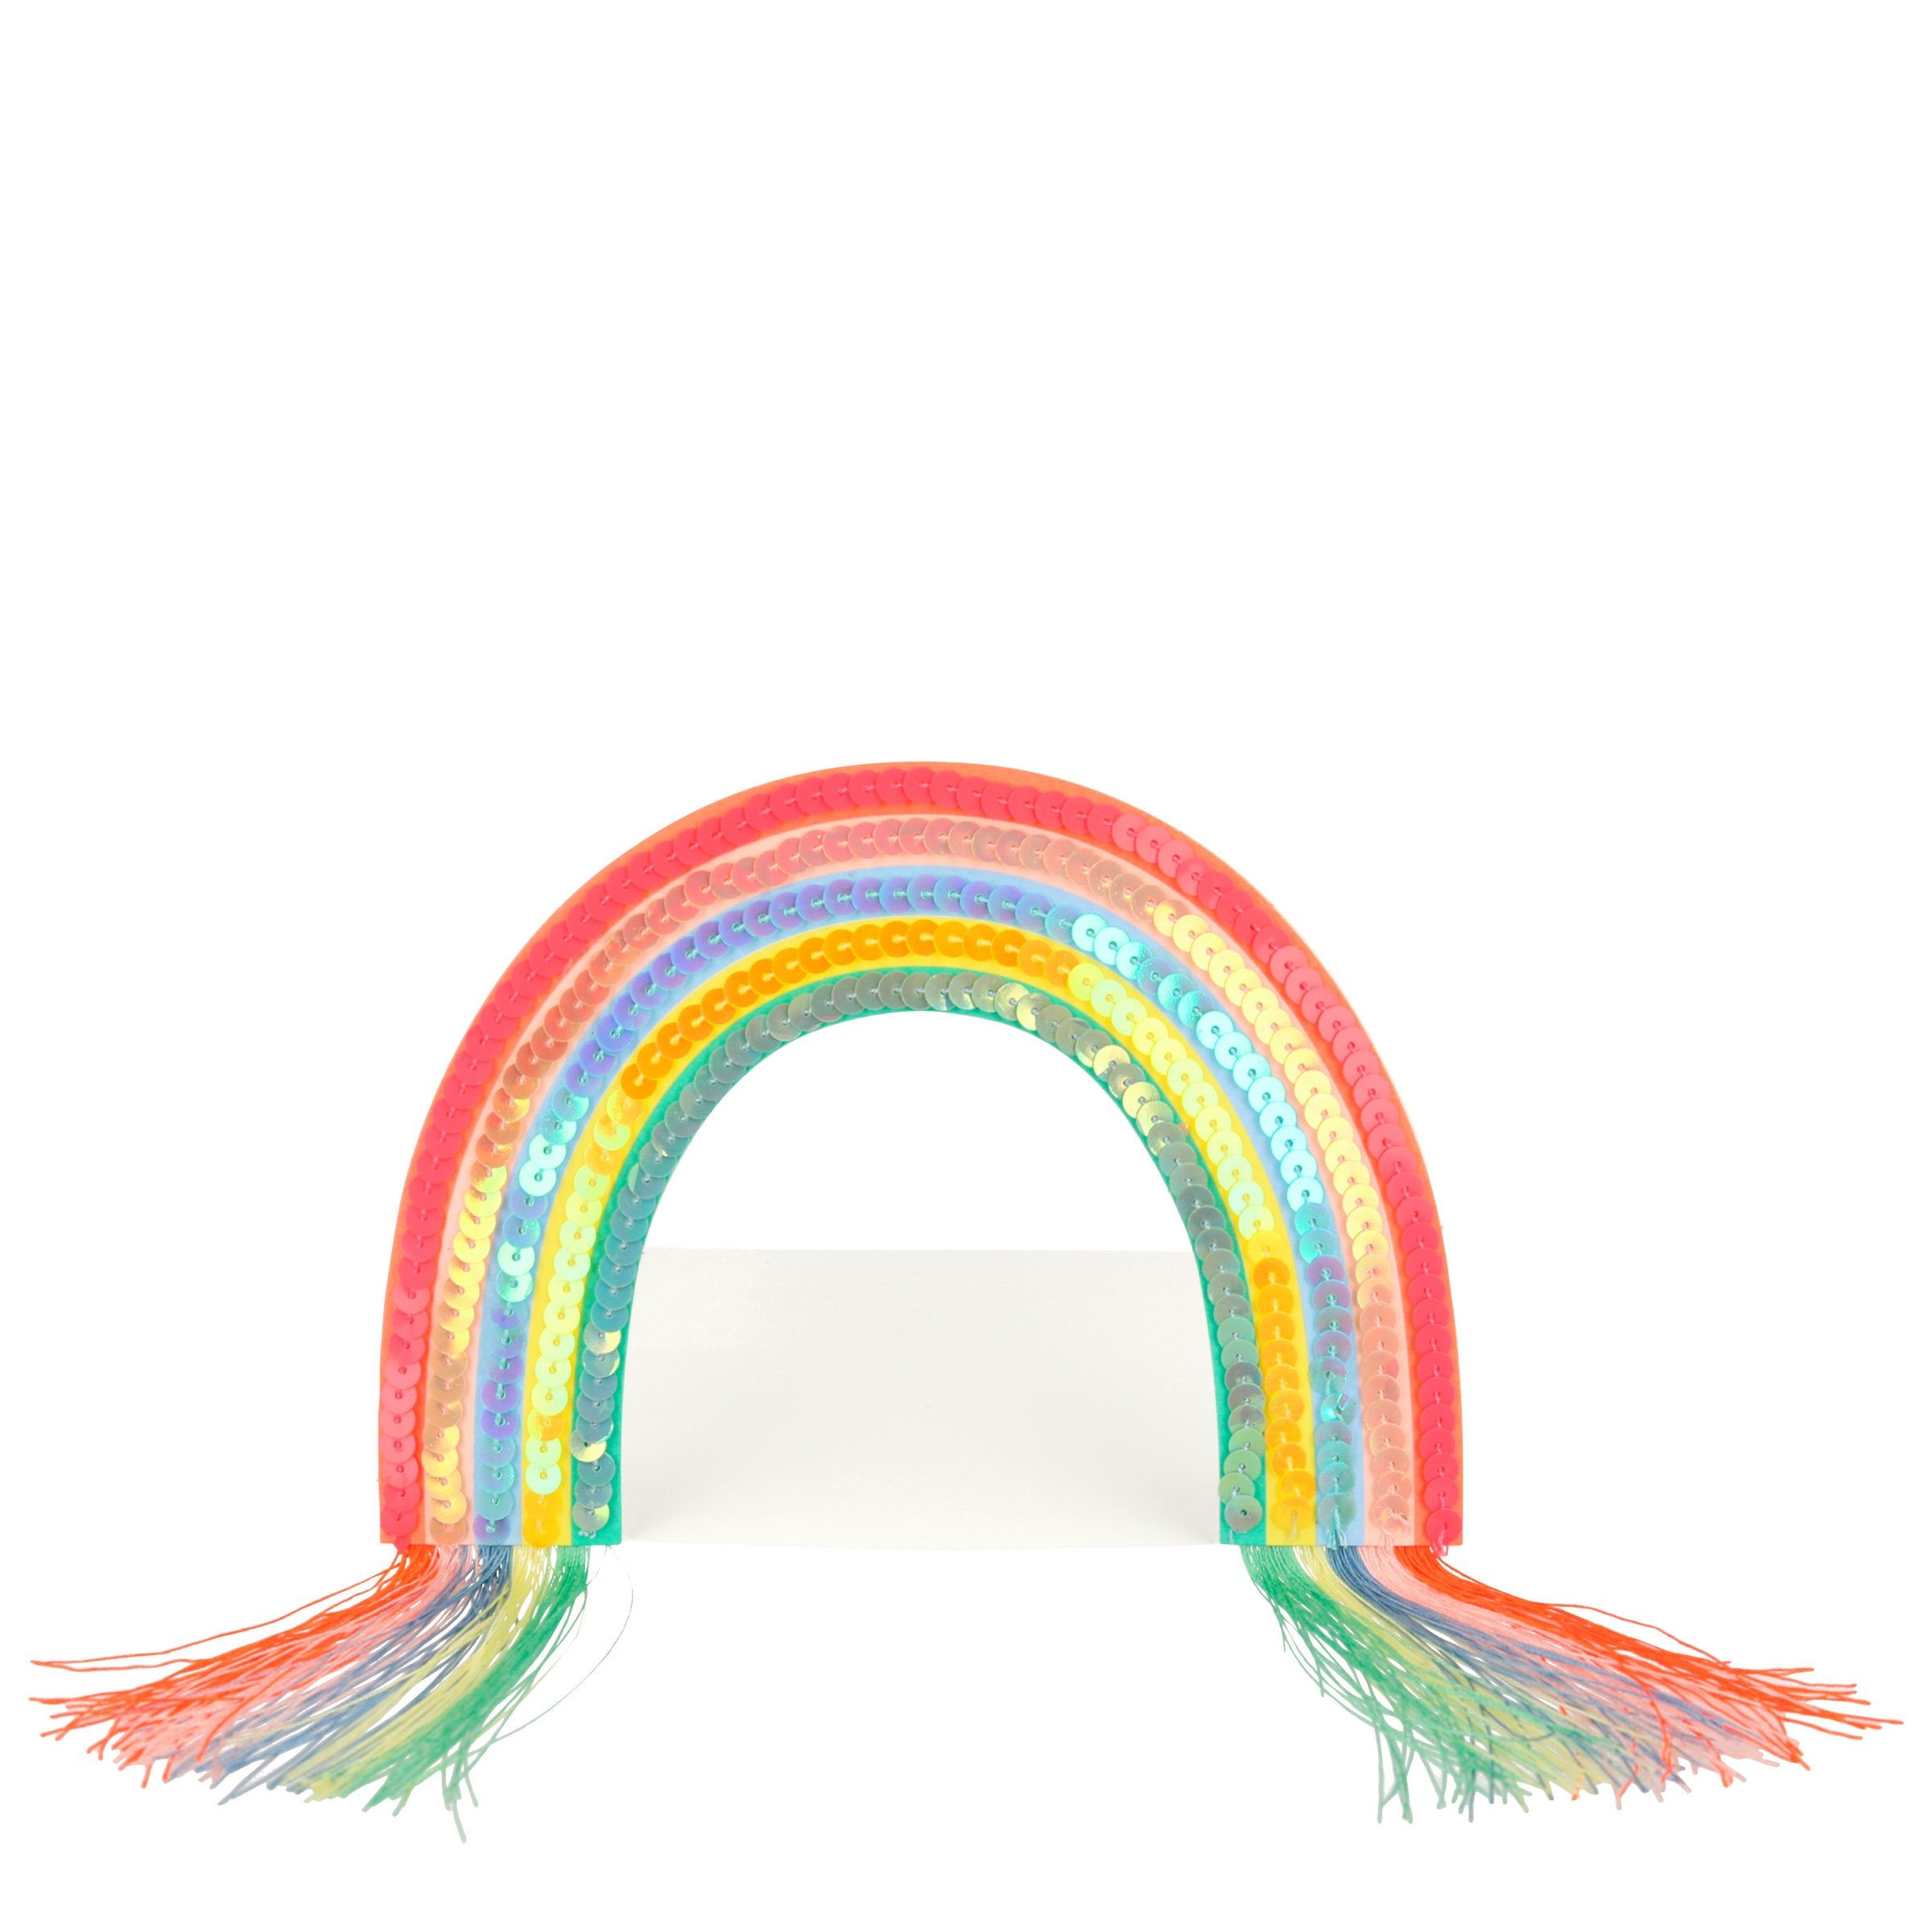 Our rainbow birthday card has stitched sequin tassels for a fabulous effect.